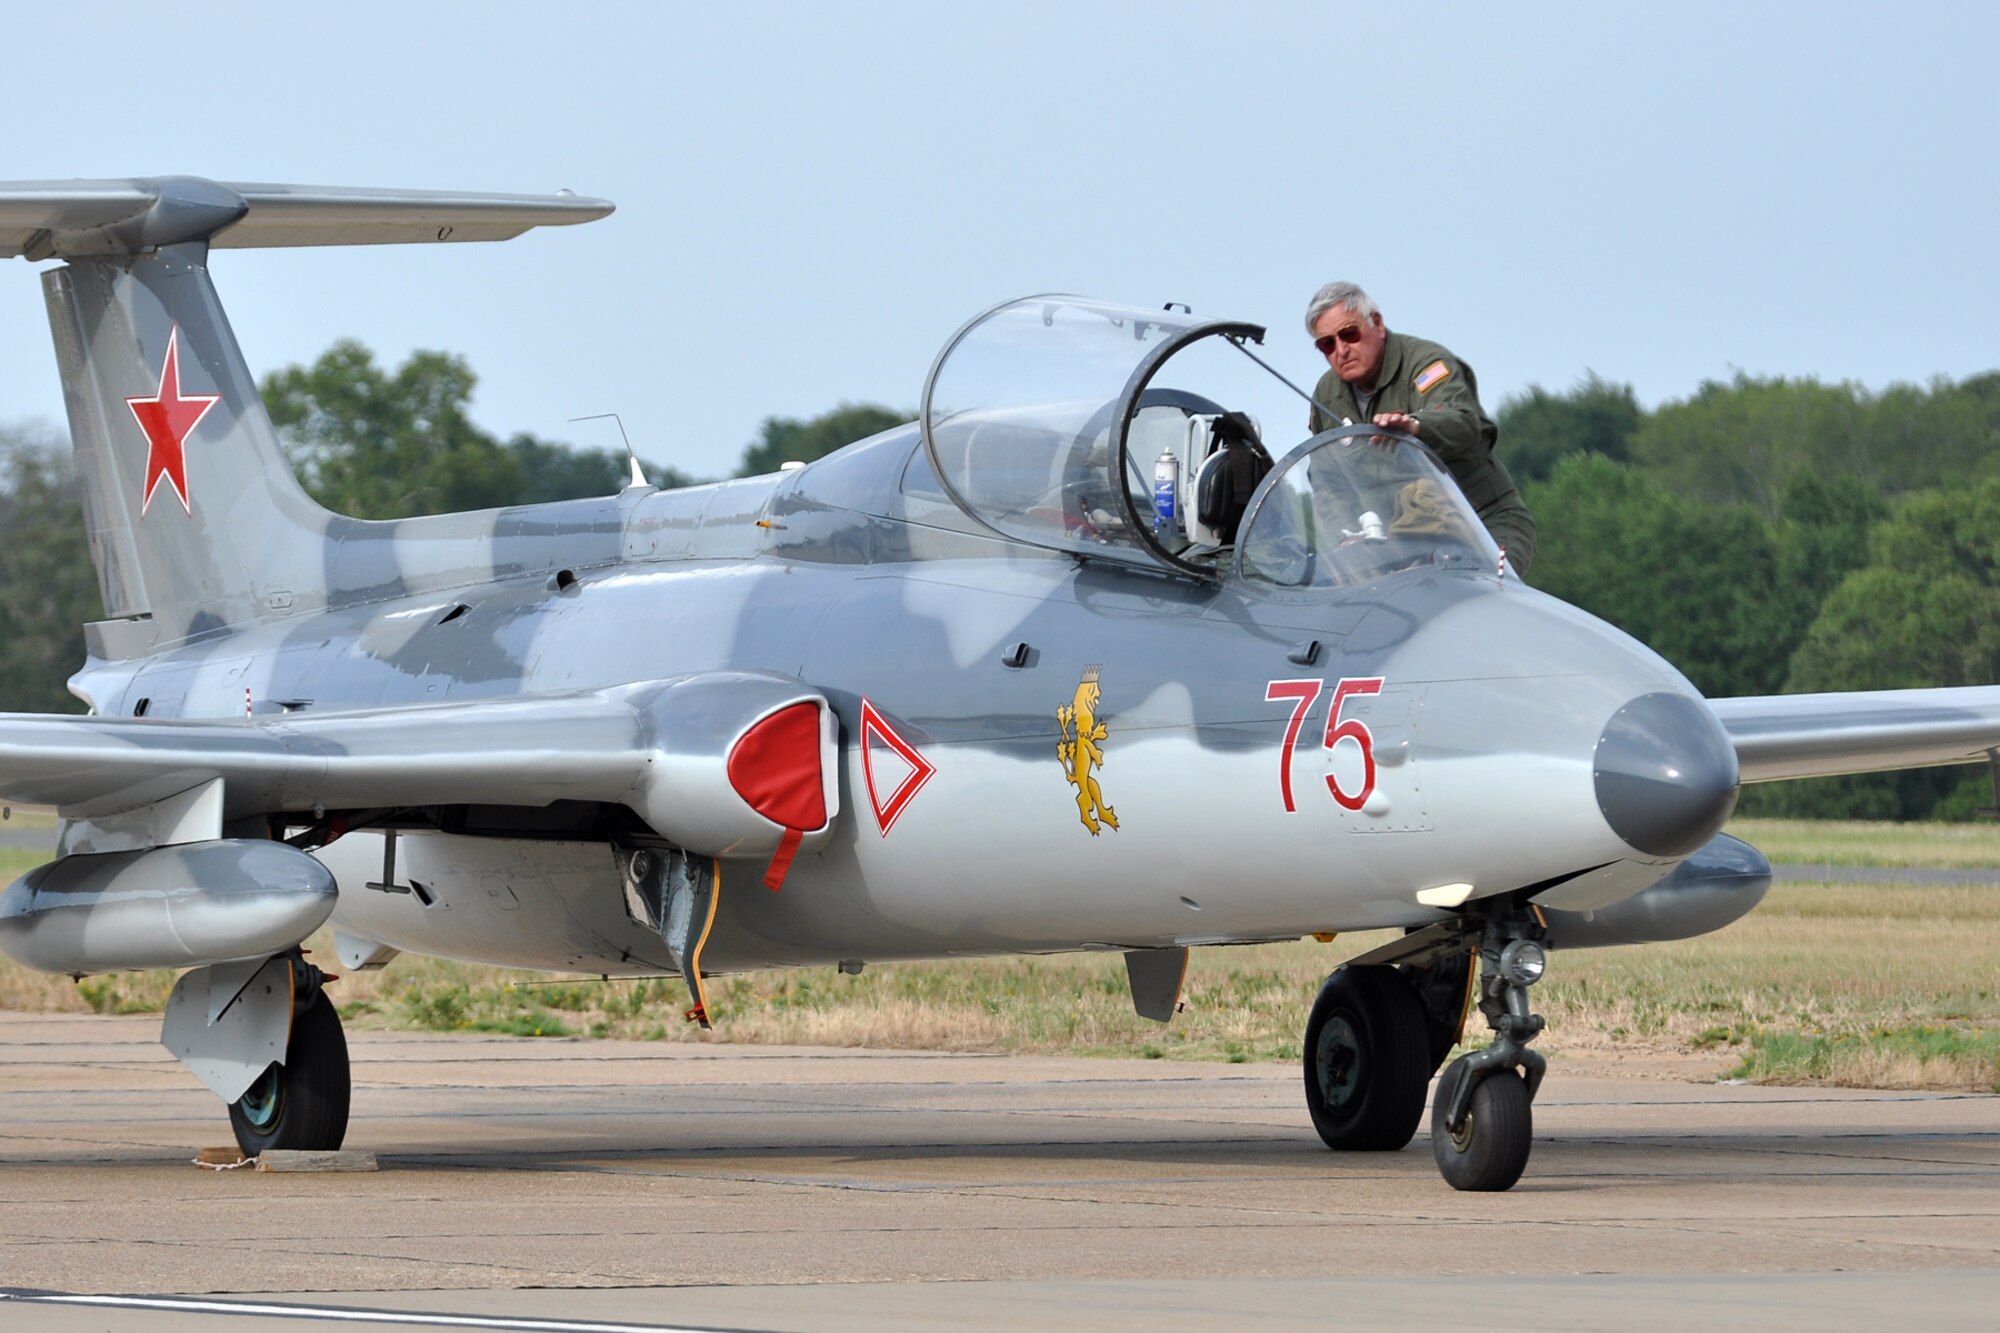 Noel Rather, a former captain with the U.S. Air Force, prepares his L-29 Delphin before taking off to participate in the Cedar Creek Lake Air Show, “Thunder Over Cedar Creek Lake,” near Mabank, Texas, July 2, 2011. Rather launched his aircraft from Tyler Pounds Regional Airport in Tyler, Texas. The Areo L-29 Delphin is a military jet trainer aircraft that became the standard jet trainer for the air forces of the Warsaw Pact nations in the 1960s. It was Czechoslovakia’s first locally designed and built jet aircraft. Rather, with his L-29 Delphin was also one of the featured performers at the “Wings Over Tyler Air Show” at the Tyler Pounds Regional Airport, July 3, 2011. (U.S. Air Force photo/Tech. Sgt. Jeff Walston)